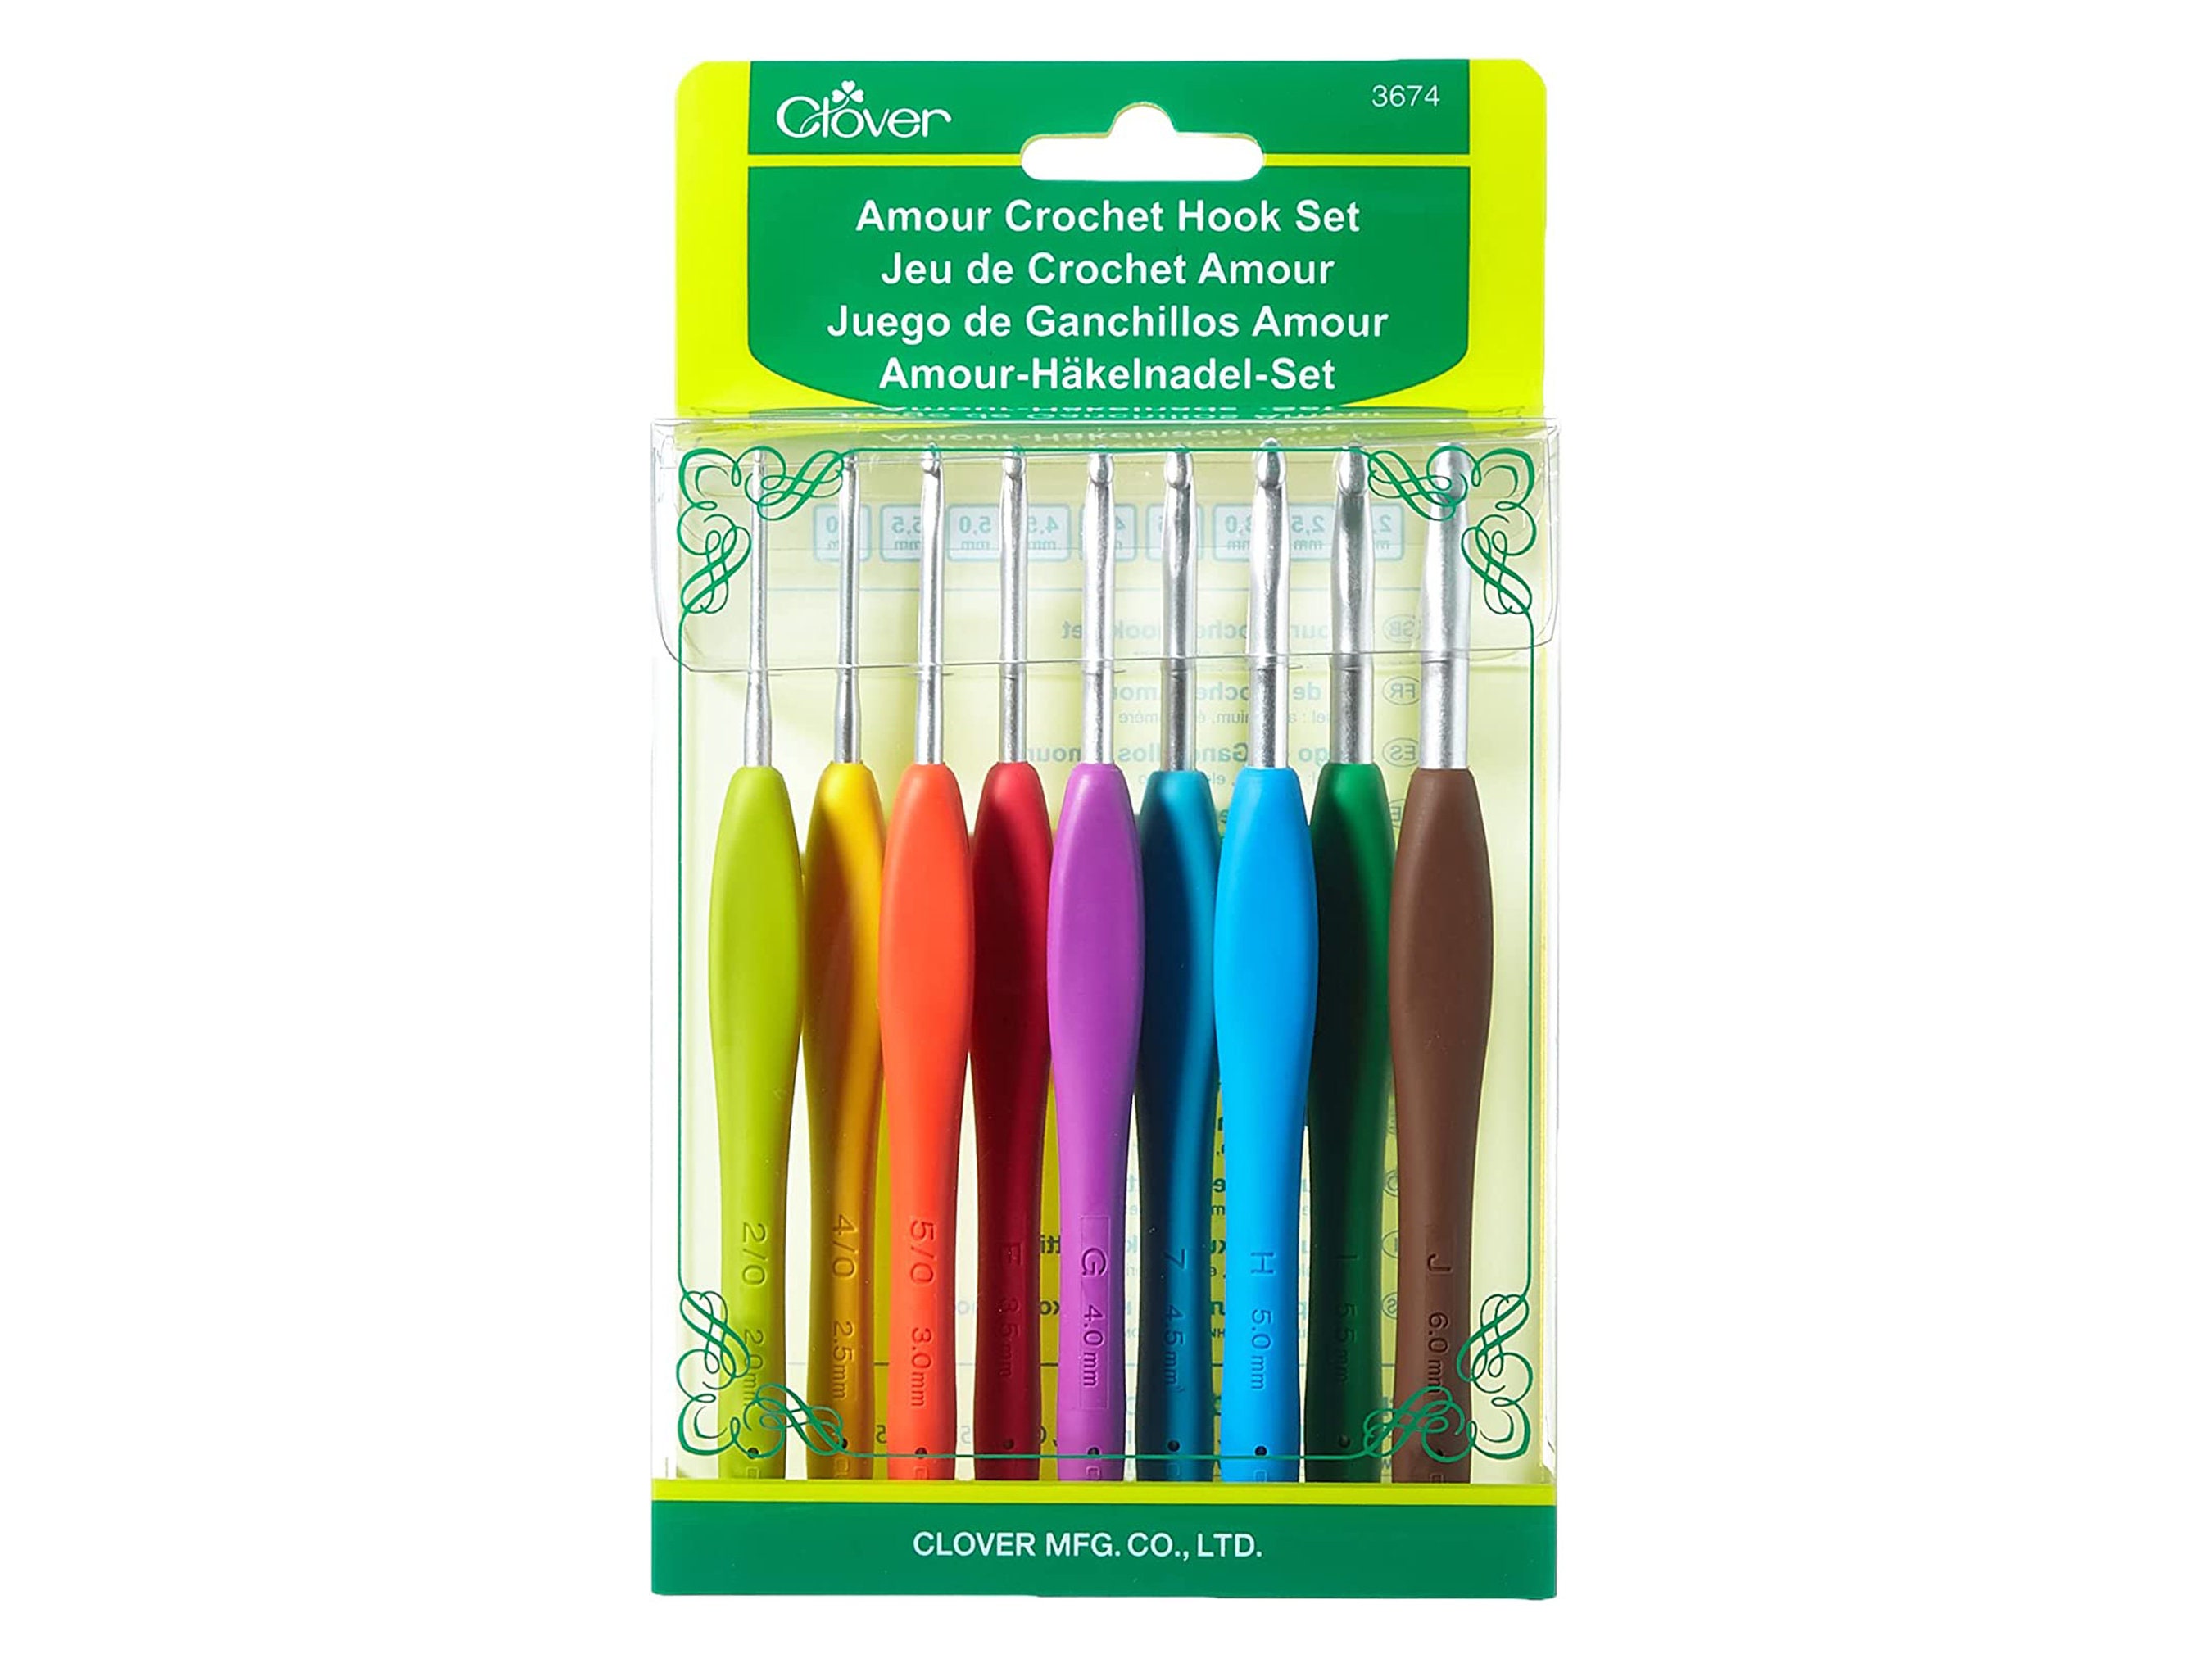 Clover Amour Steel Crochet Hooks. Comfort Grip Handle. for Lace and Crochet  Thread Projects. Pick From 12 to 0 .6mm 1.75mm 1220 1226 -  Canada